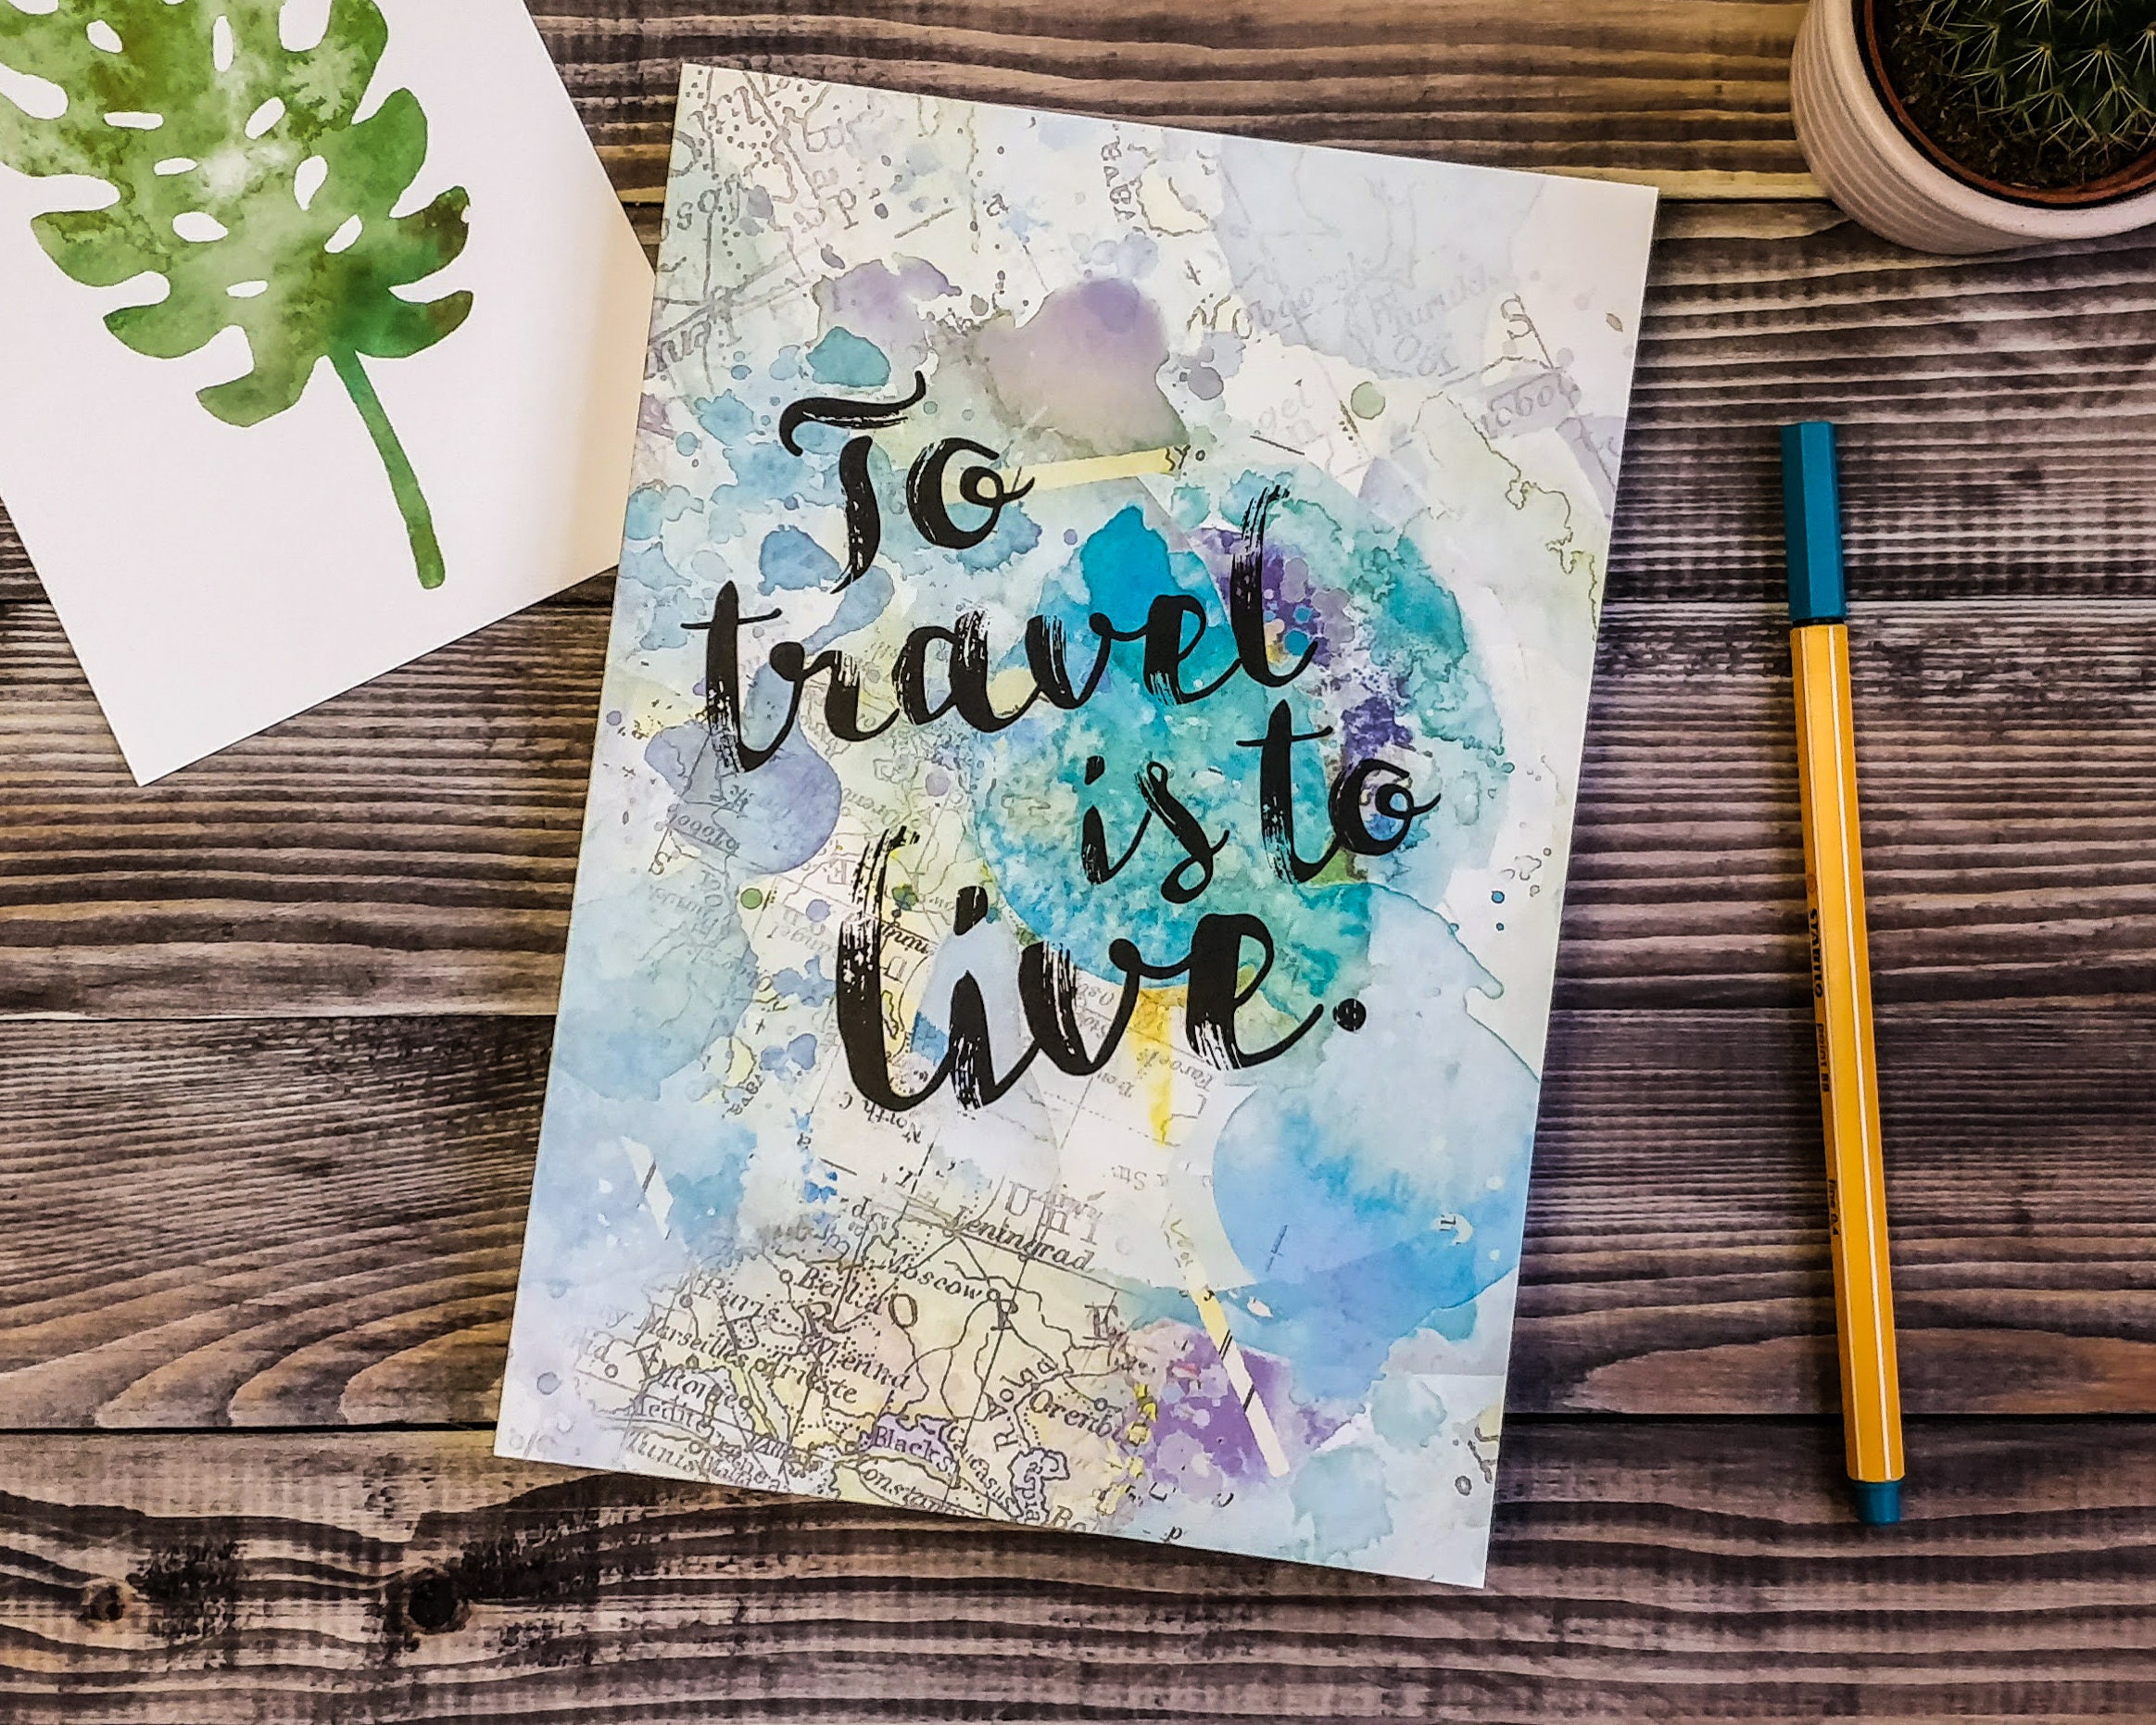 Pin on Travel Quotes & Travel Journal Ideas